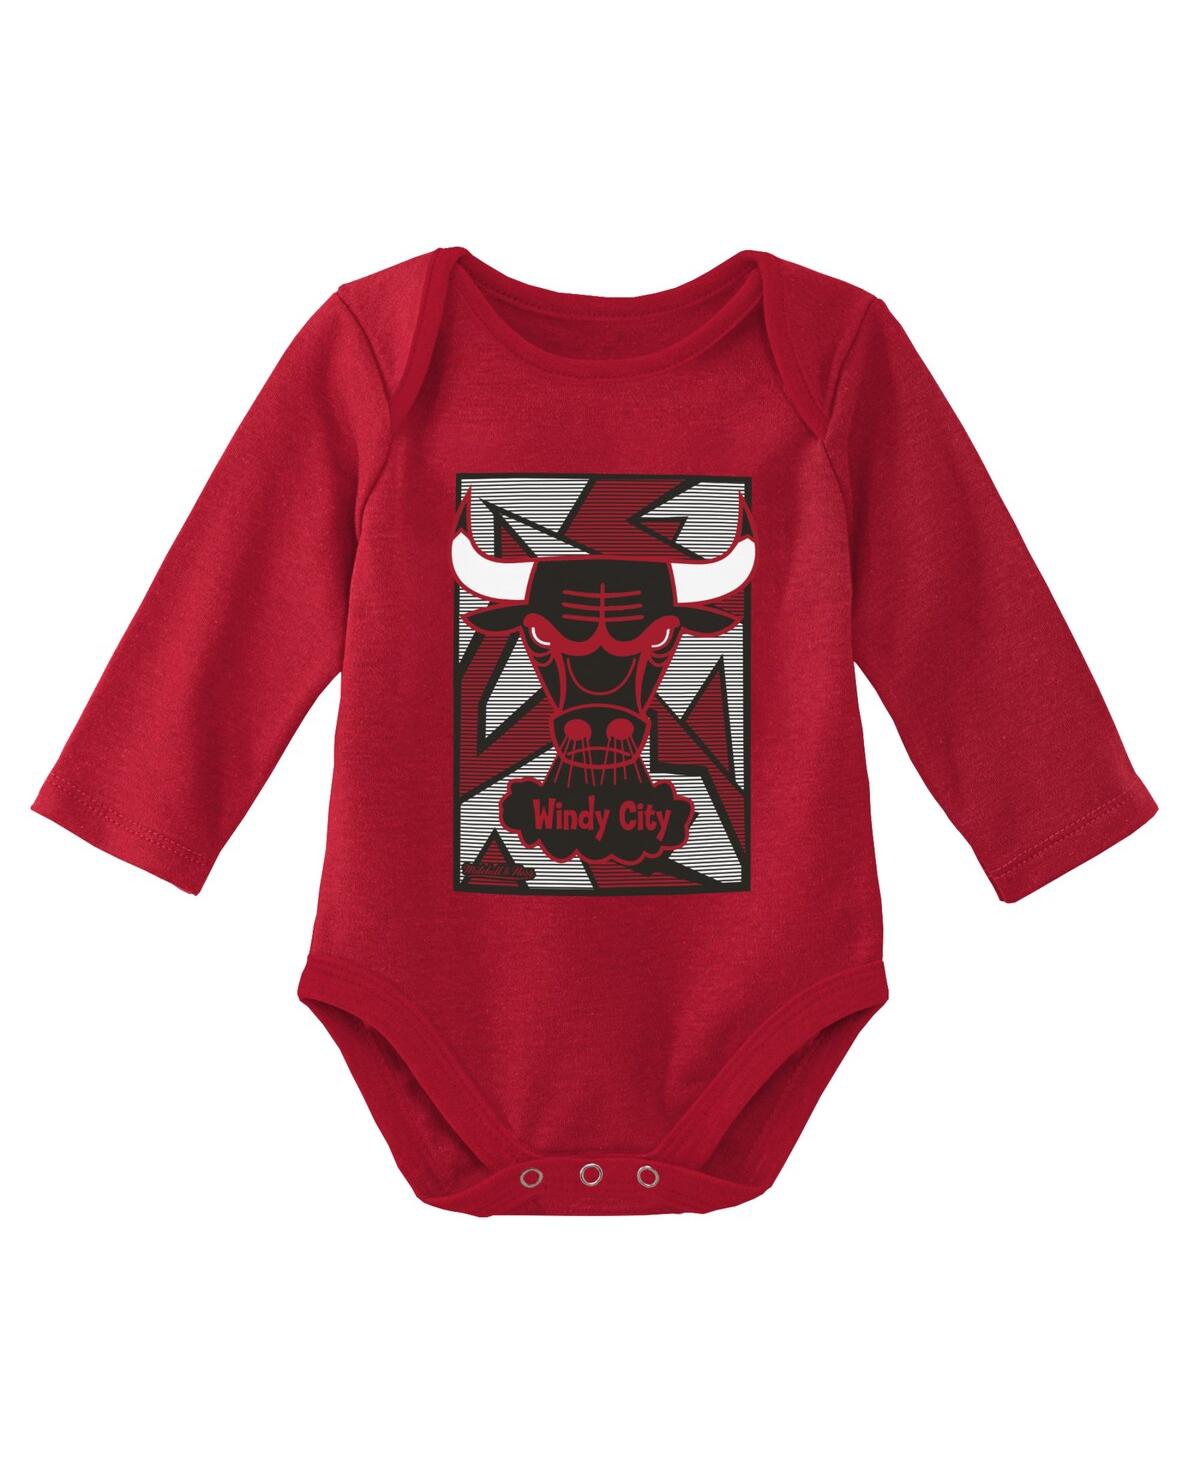 Shop Mitchell & Ness Infant Boys And Girls  Black, Red Chicago Bulls Hardwood Classics Bodysuits And Cuffe In Black,red